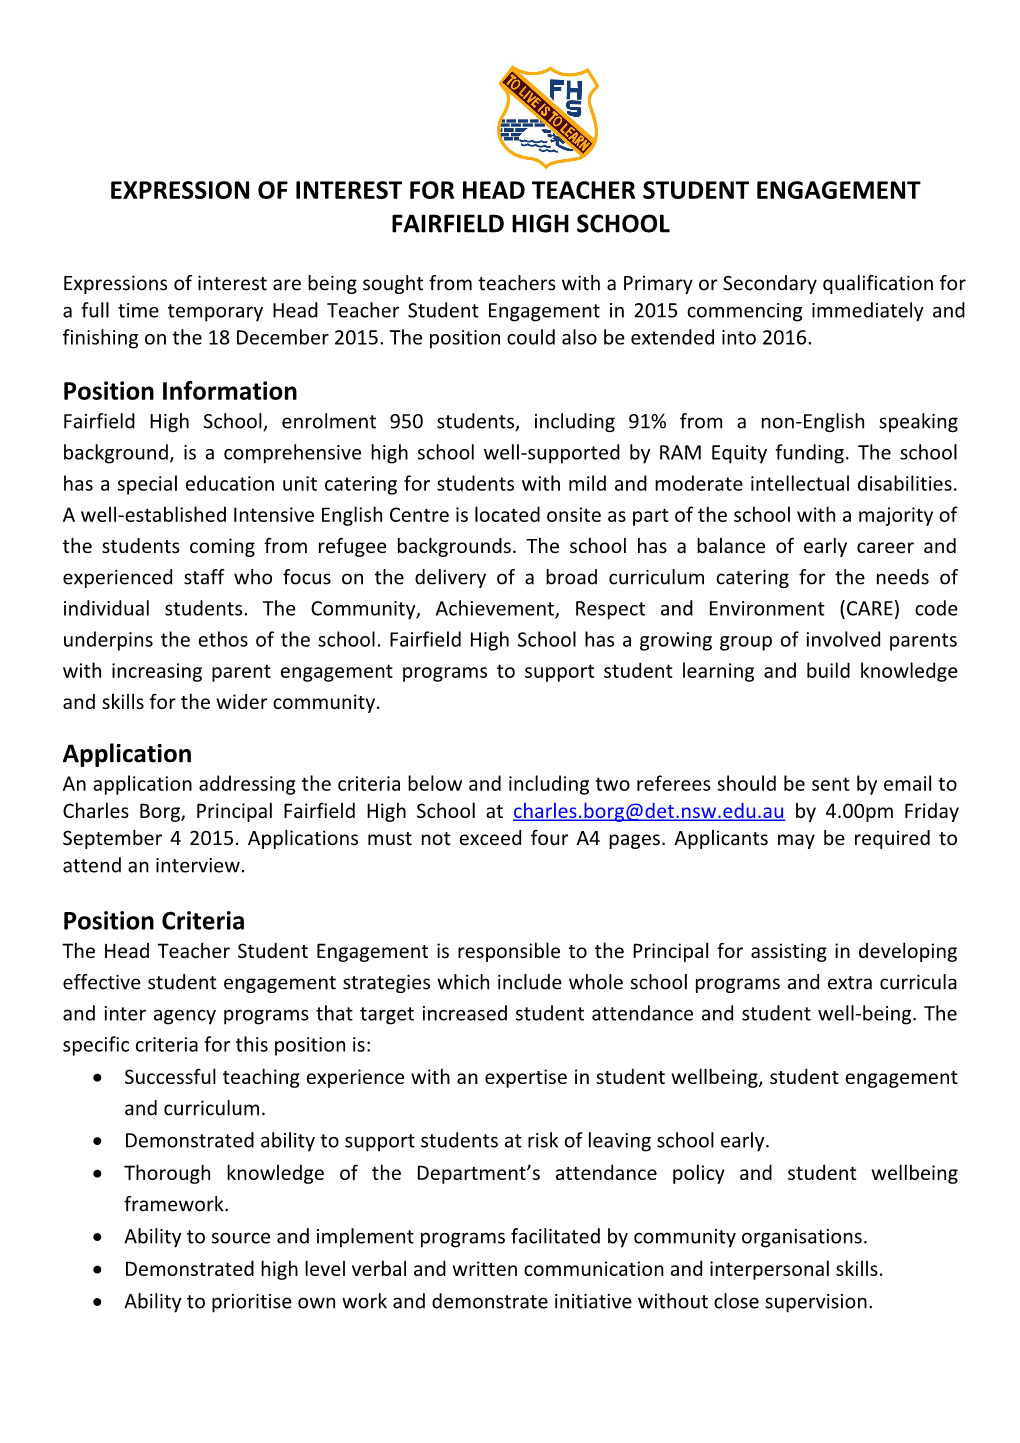 Expression of Interest for Head Teacher Student Engagement